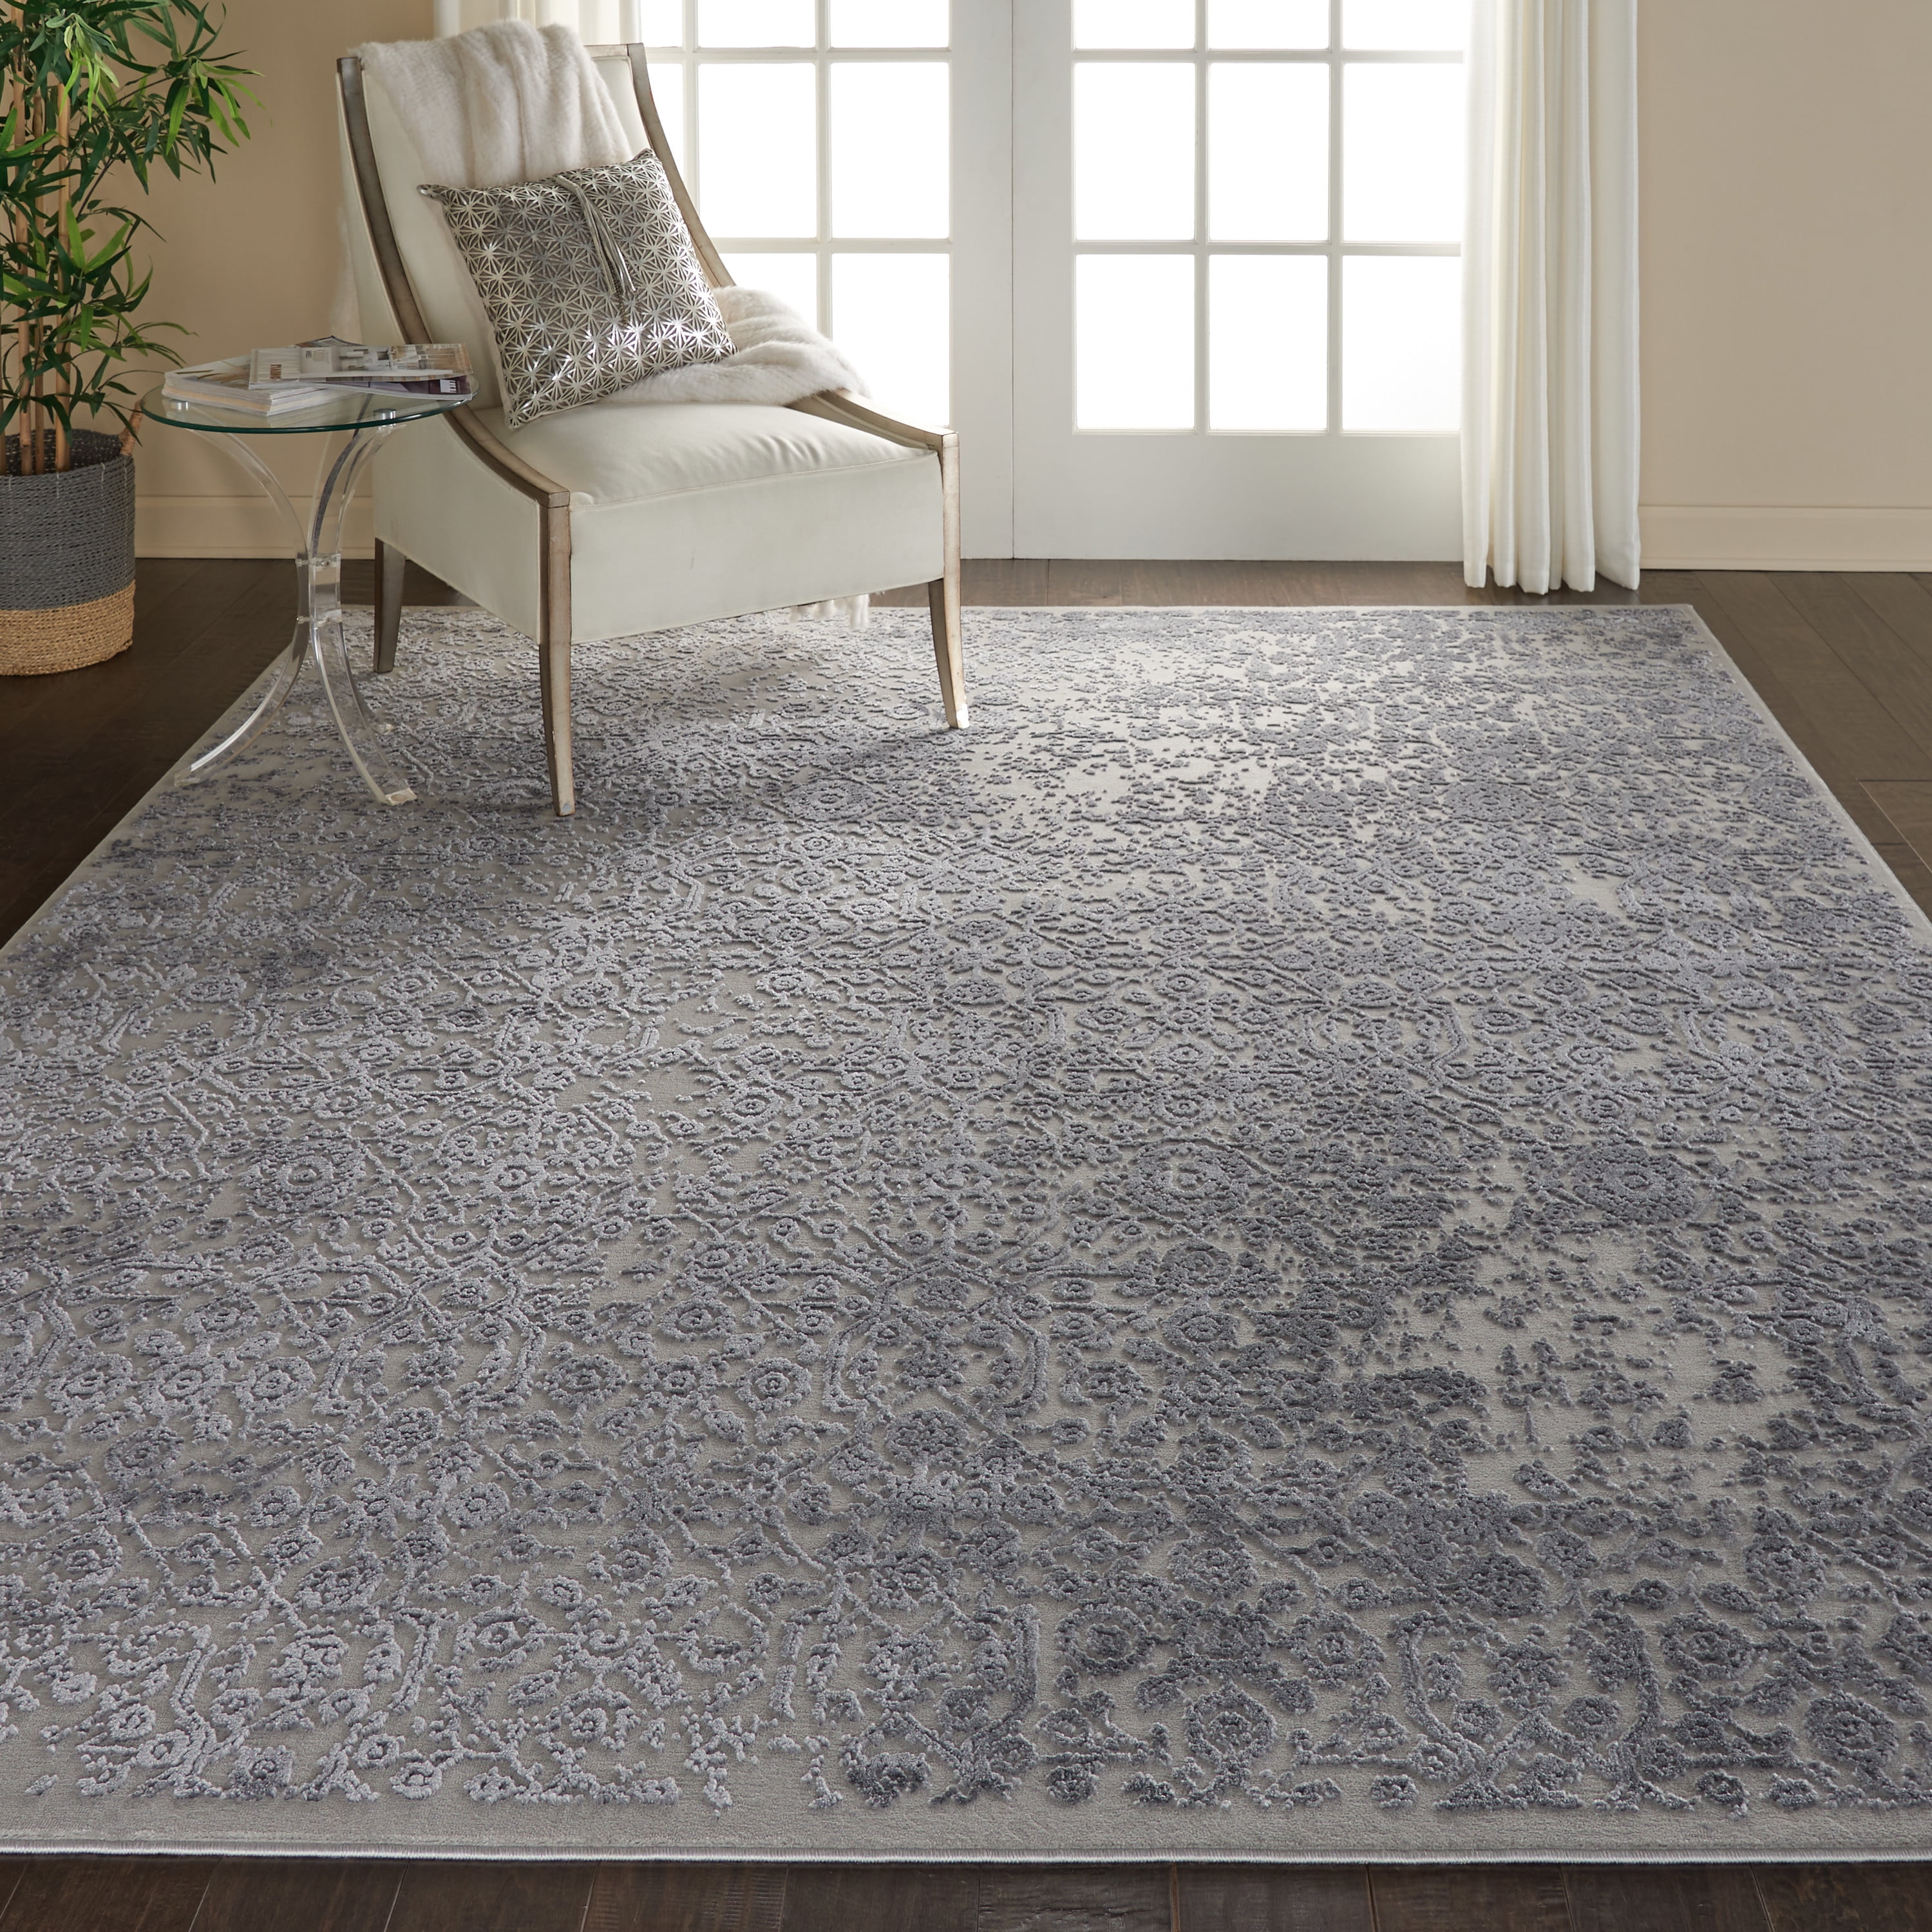 10 Slate Blue And Grey French Country, Country Rugs For Living Room